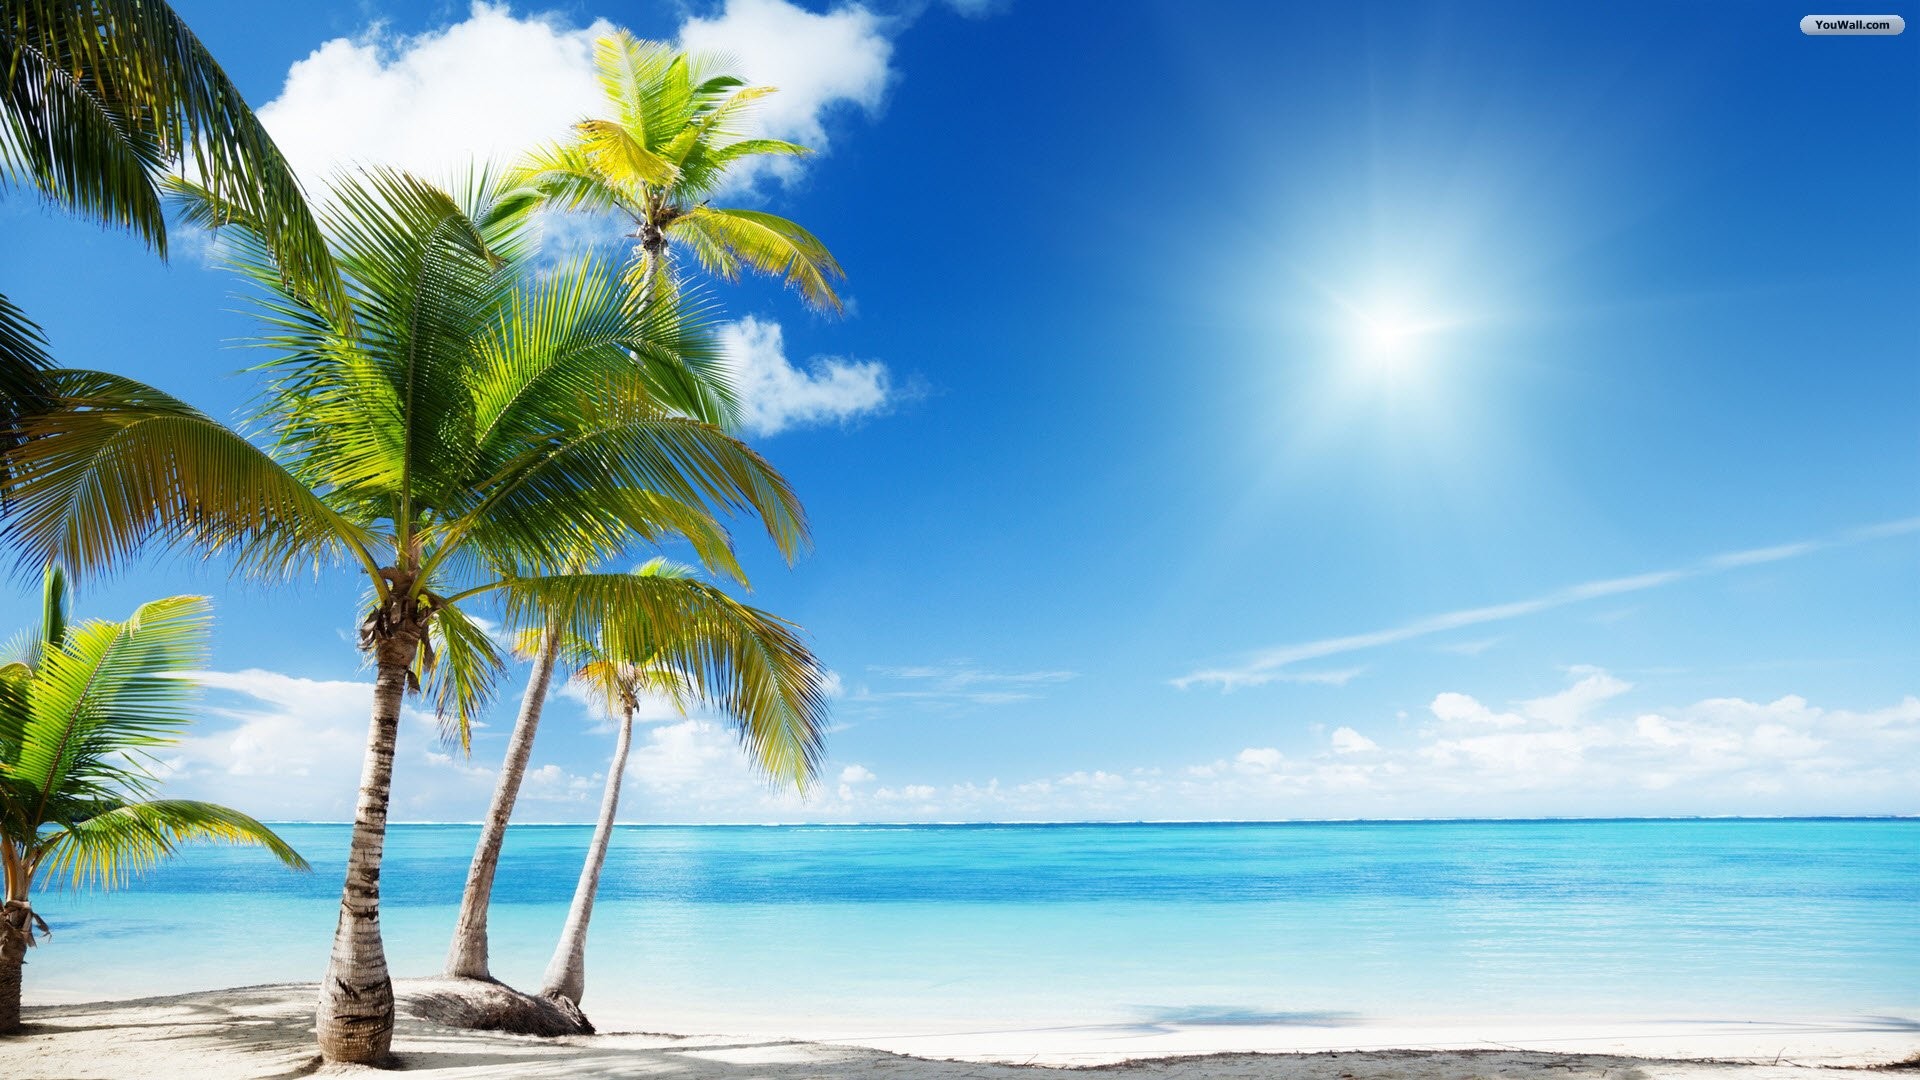 1920x1080 tropical oasis backgrounds - Google Search